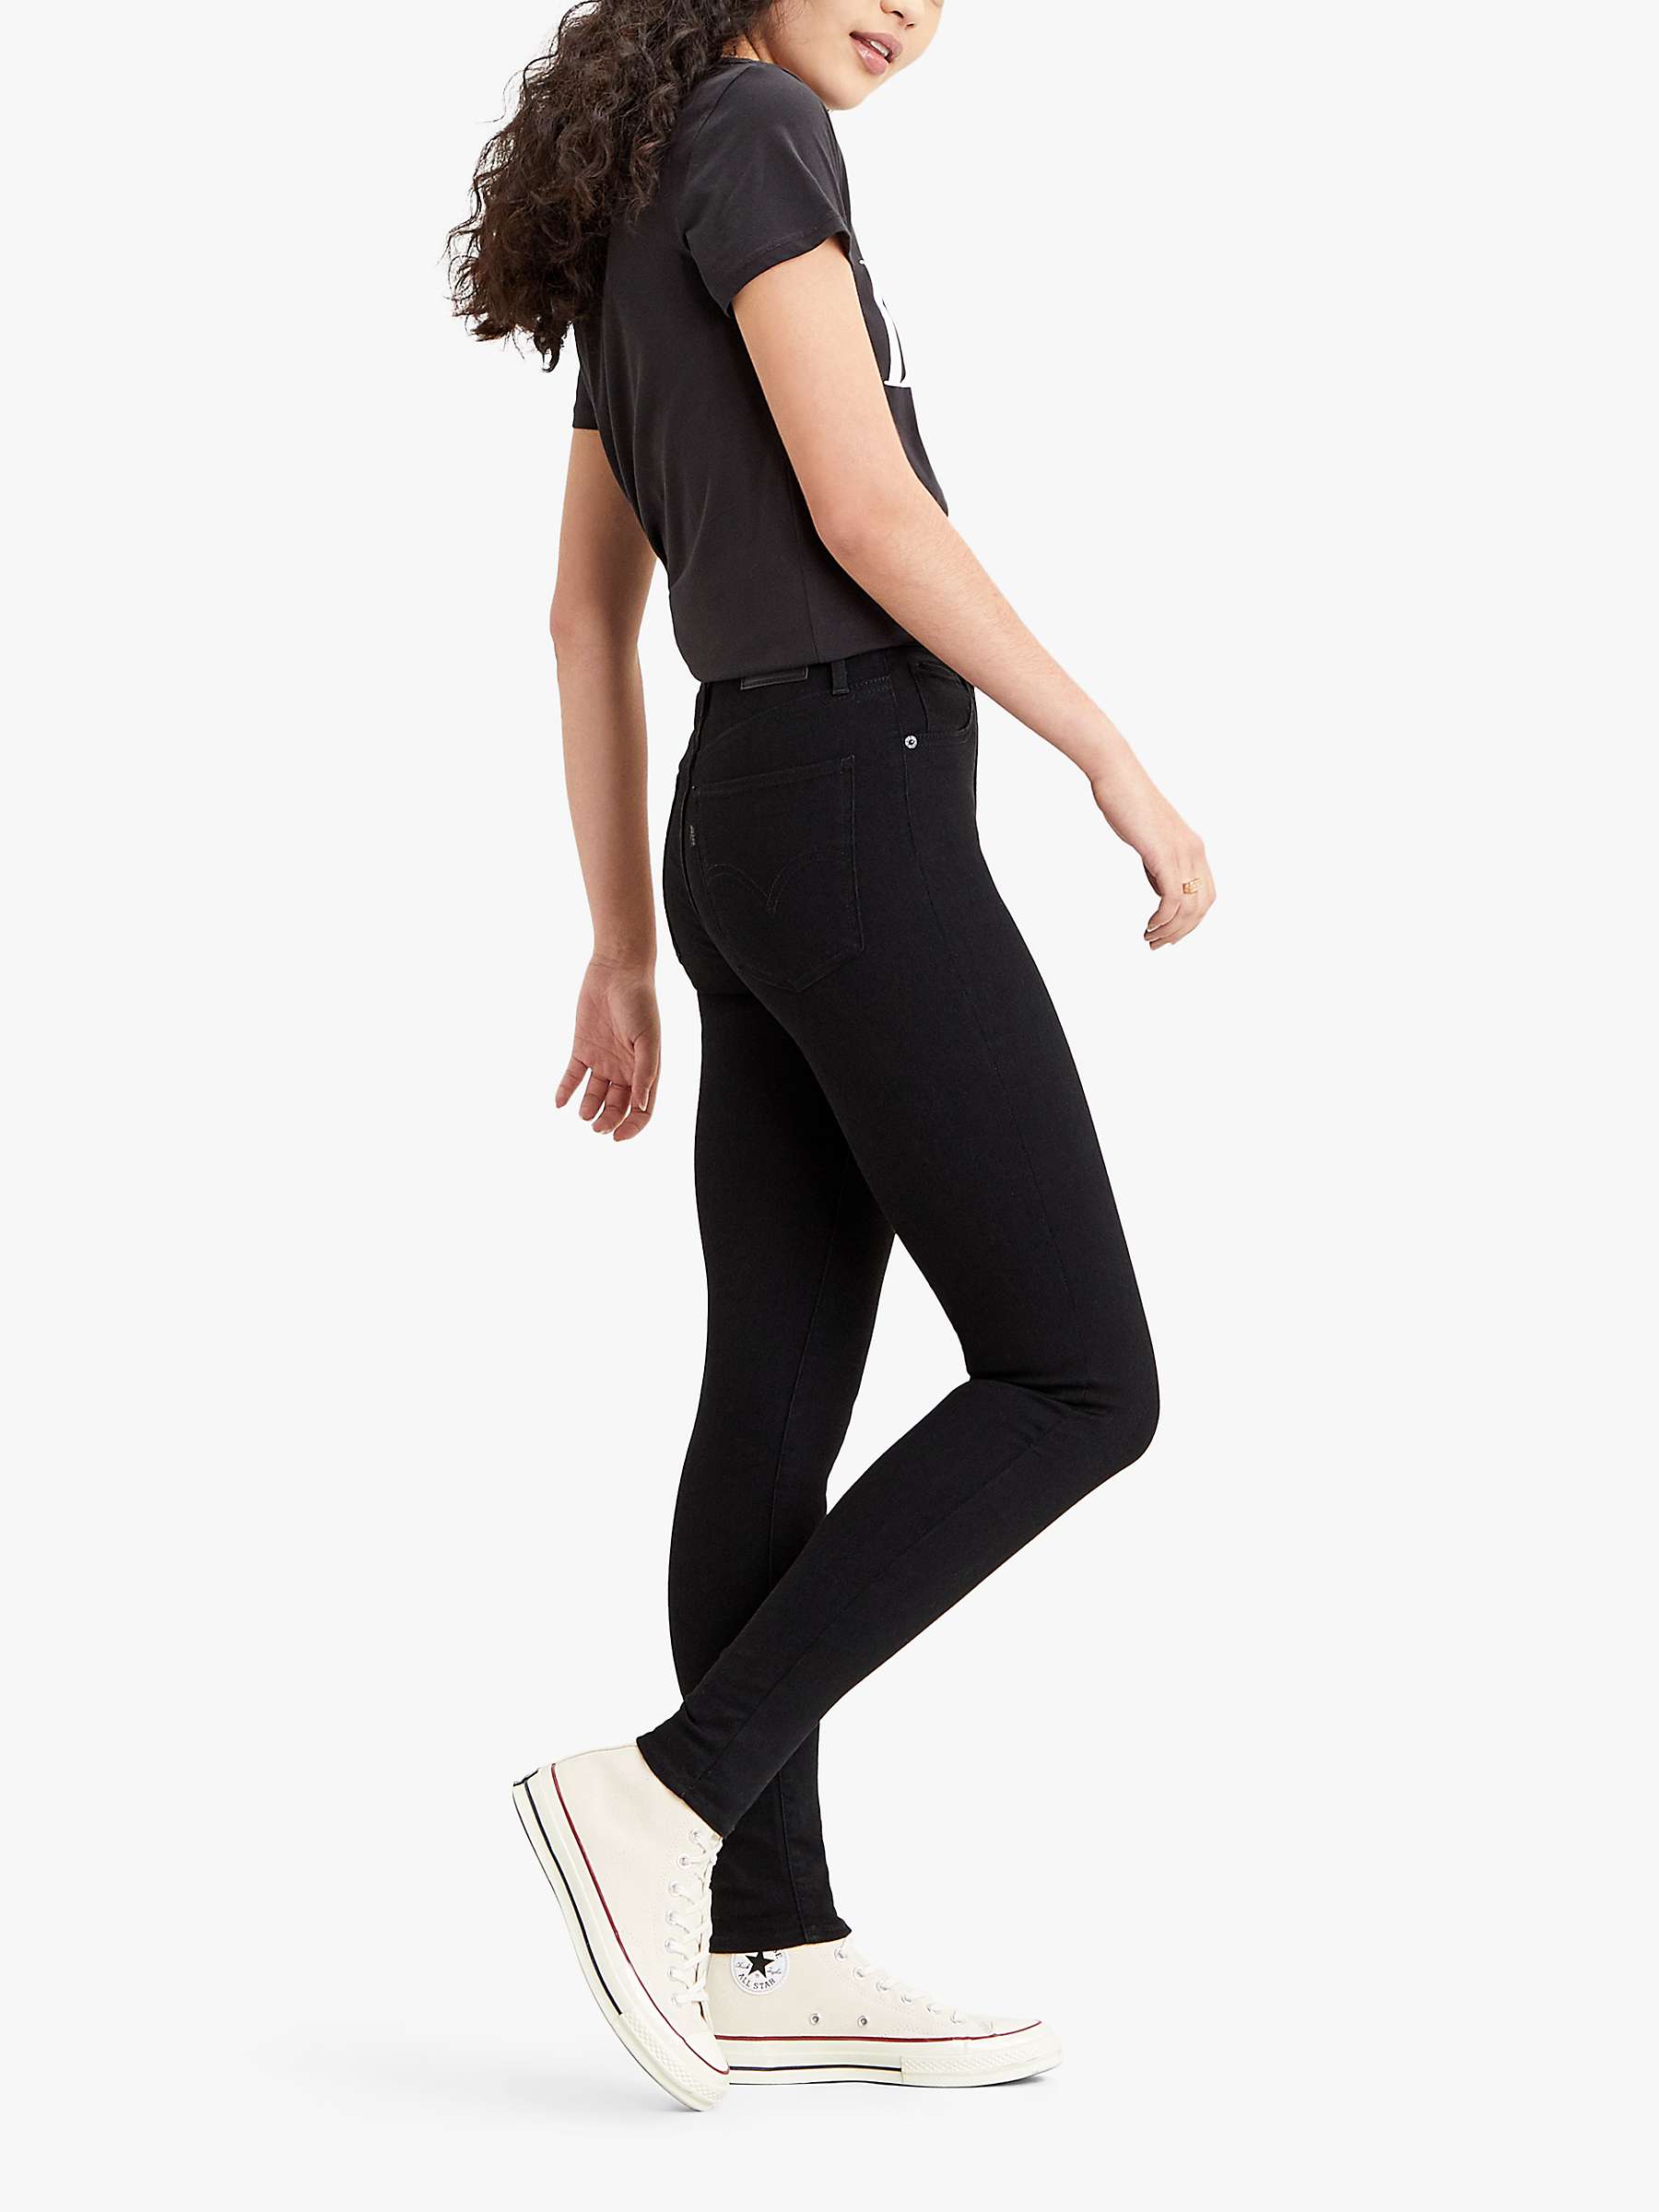 Buy Levi's Mile High Extra High Rise Super Skinny Jeans Online at johnlewis.com